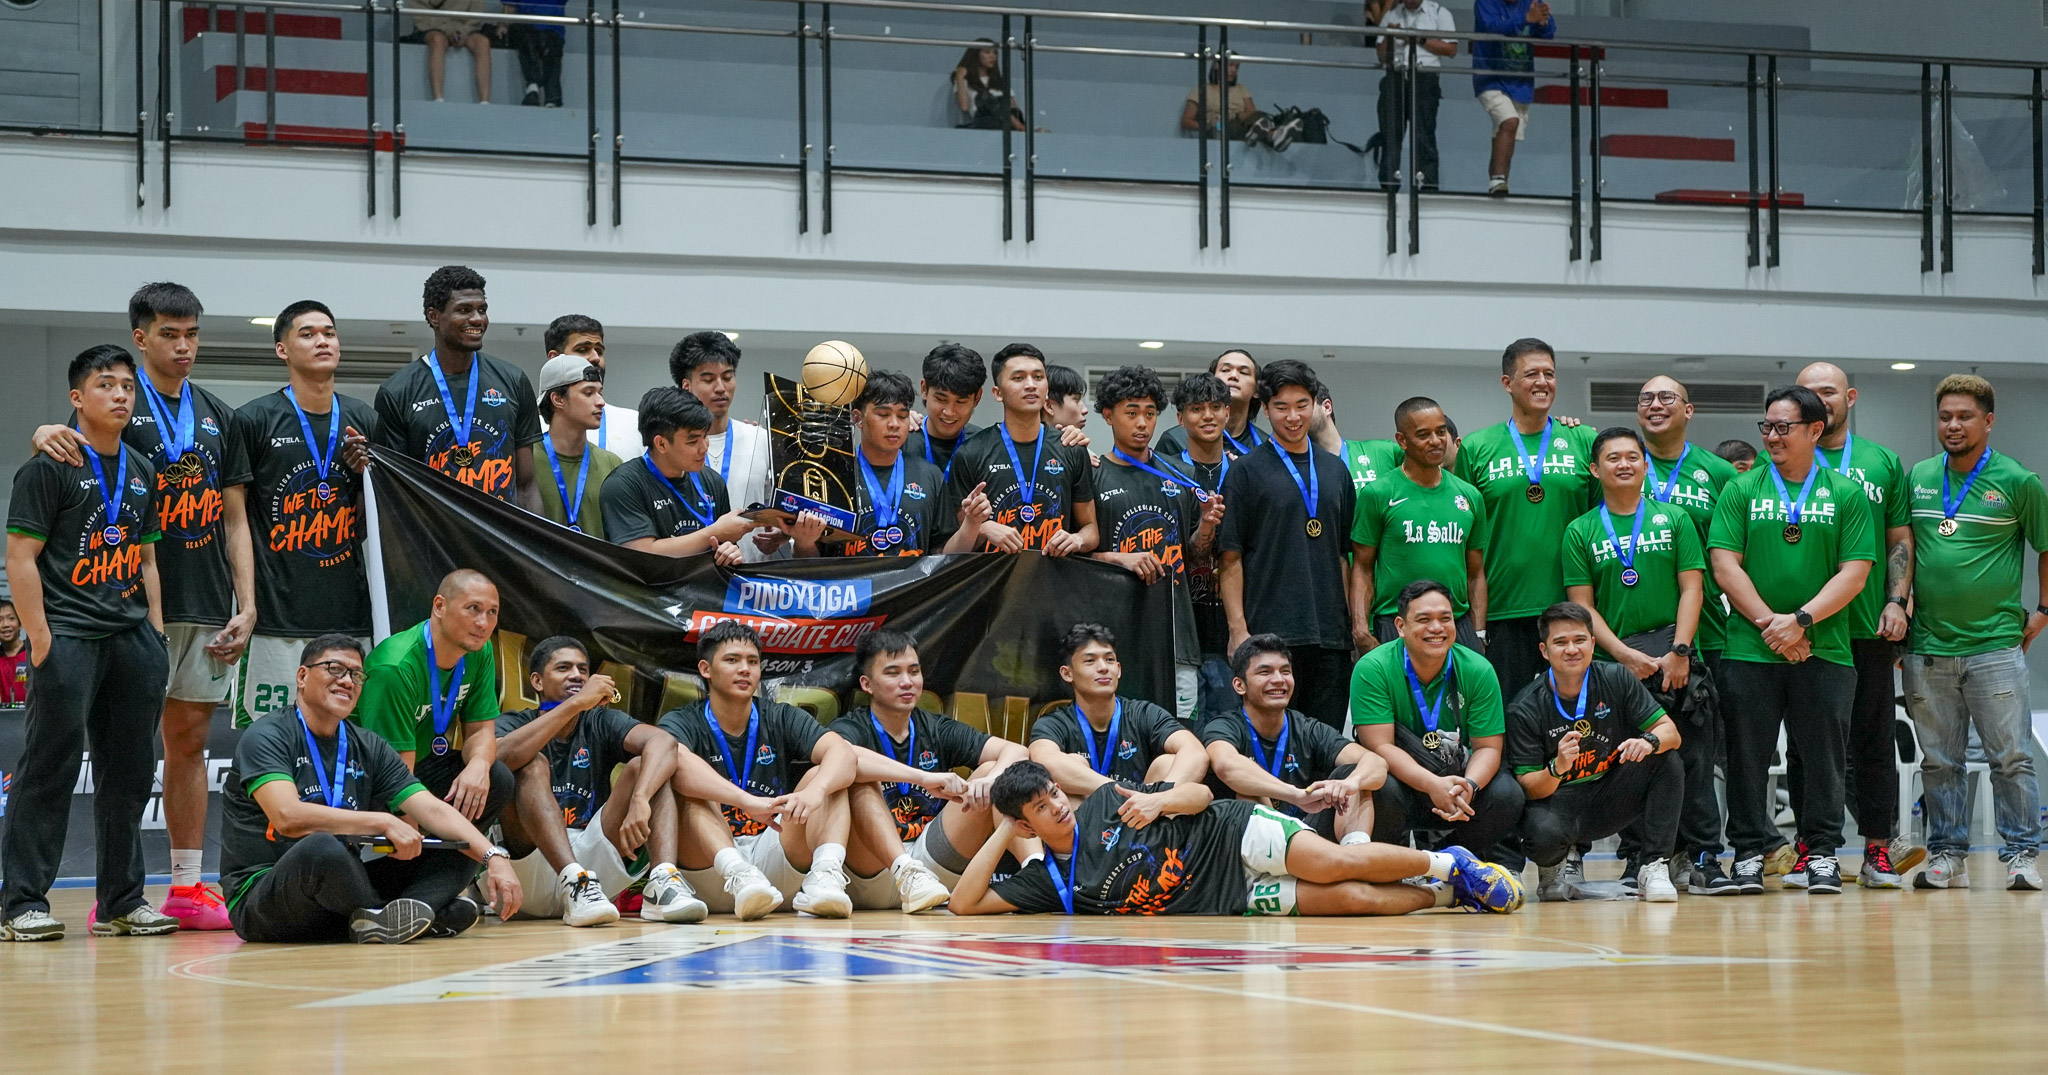 PINOYLIGA: Jacob Cortez leads Green Archers to inaugural Pinoyliga championship reign after taming Bulldogs in a heated Finals brawl, 84-81